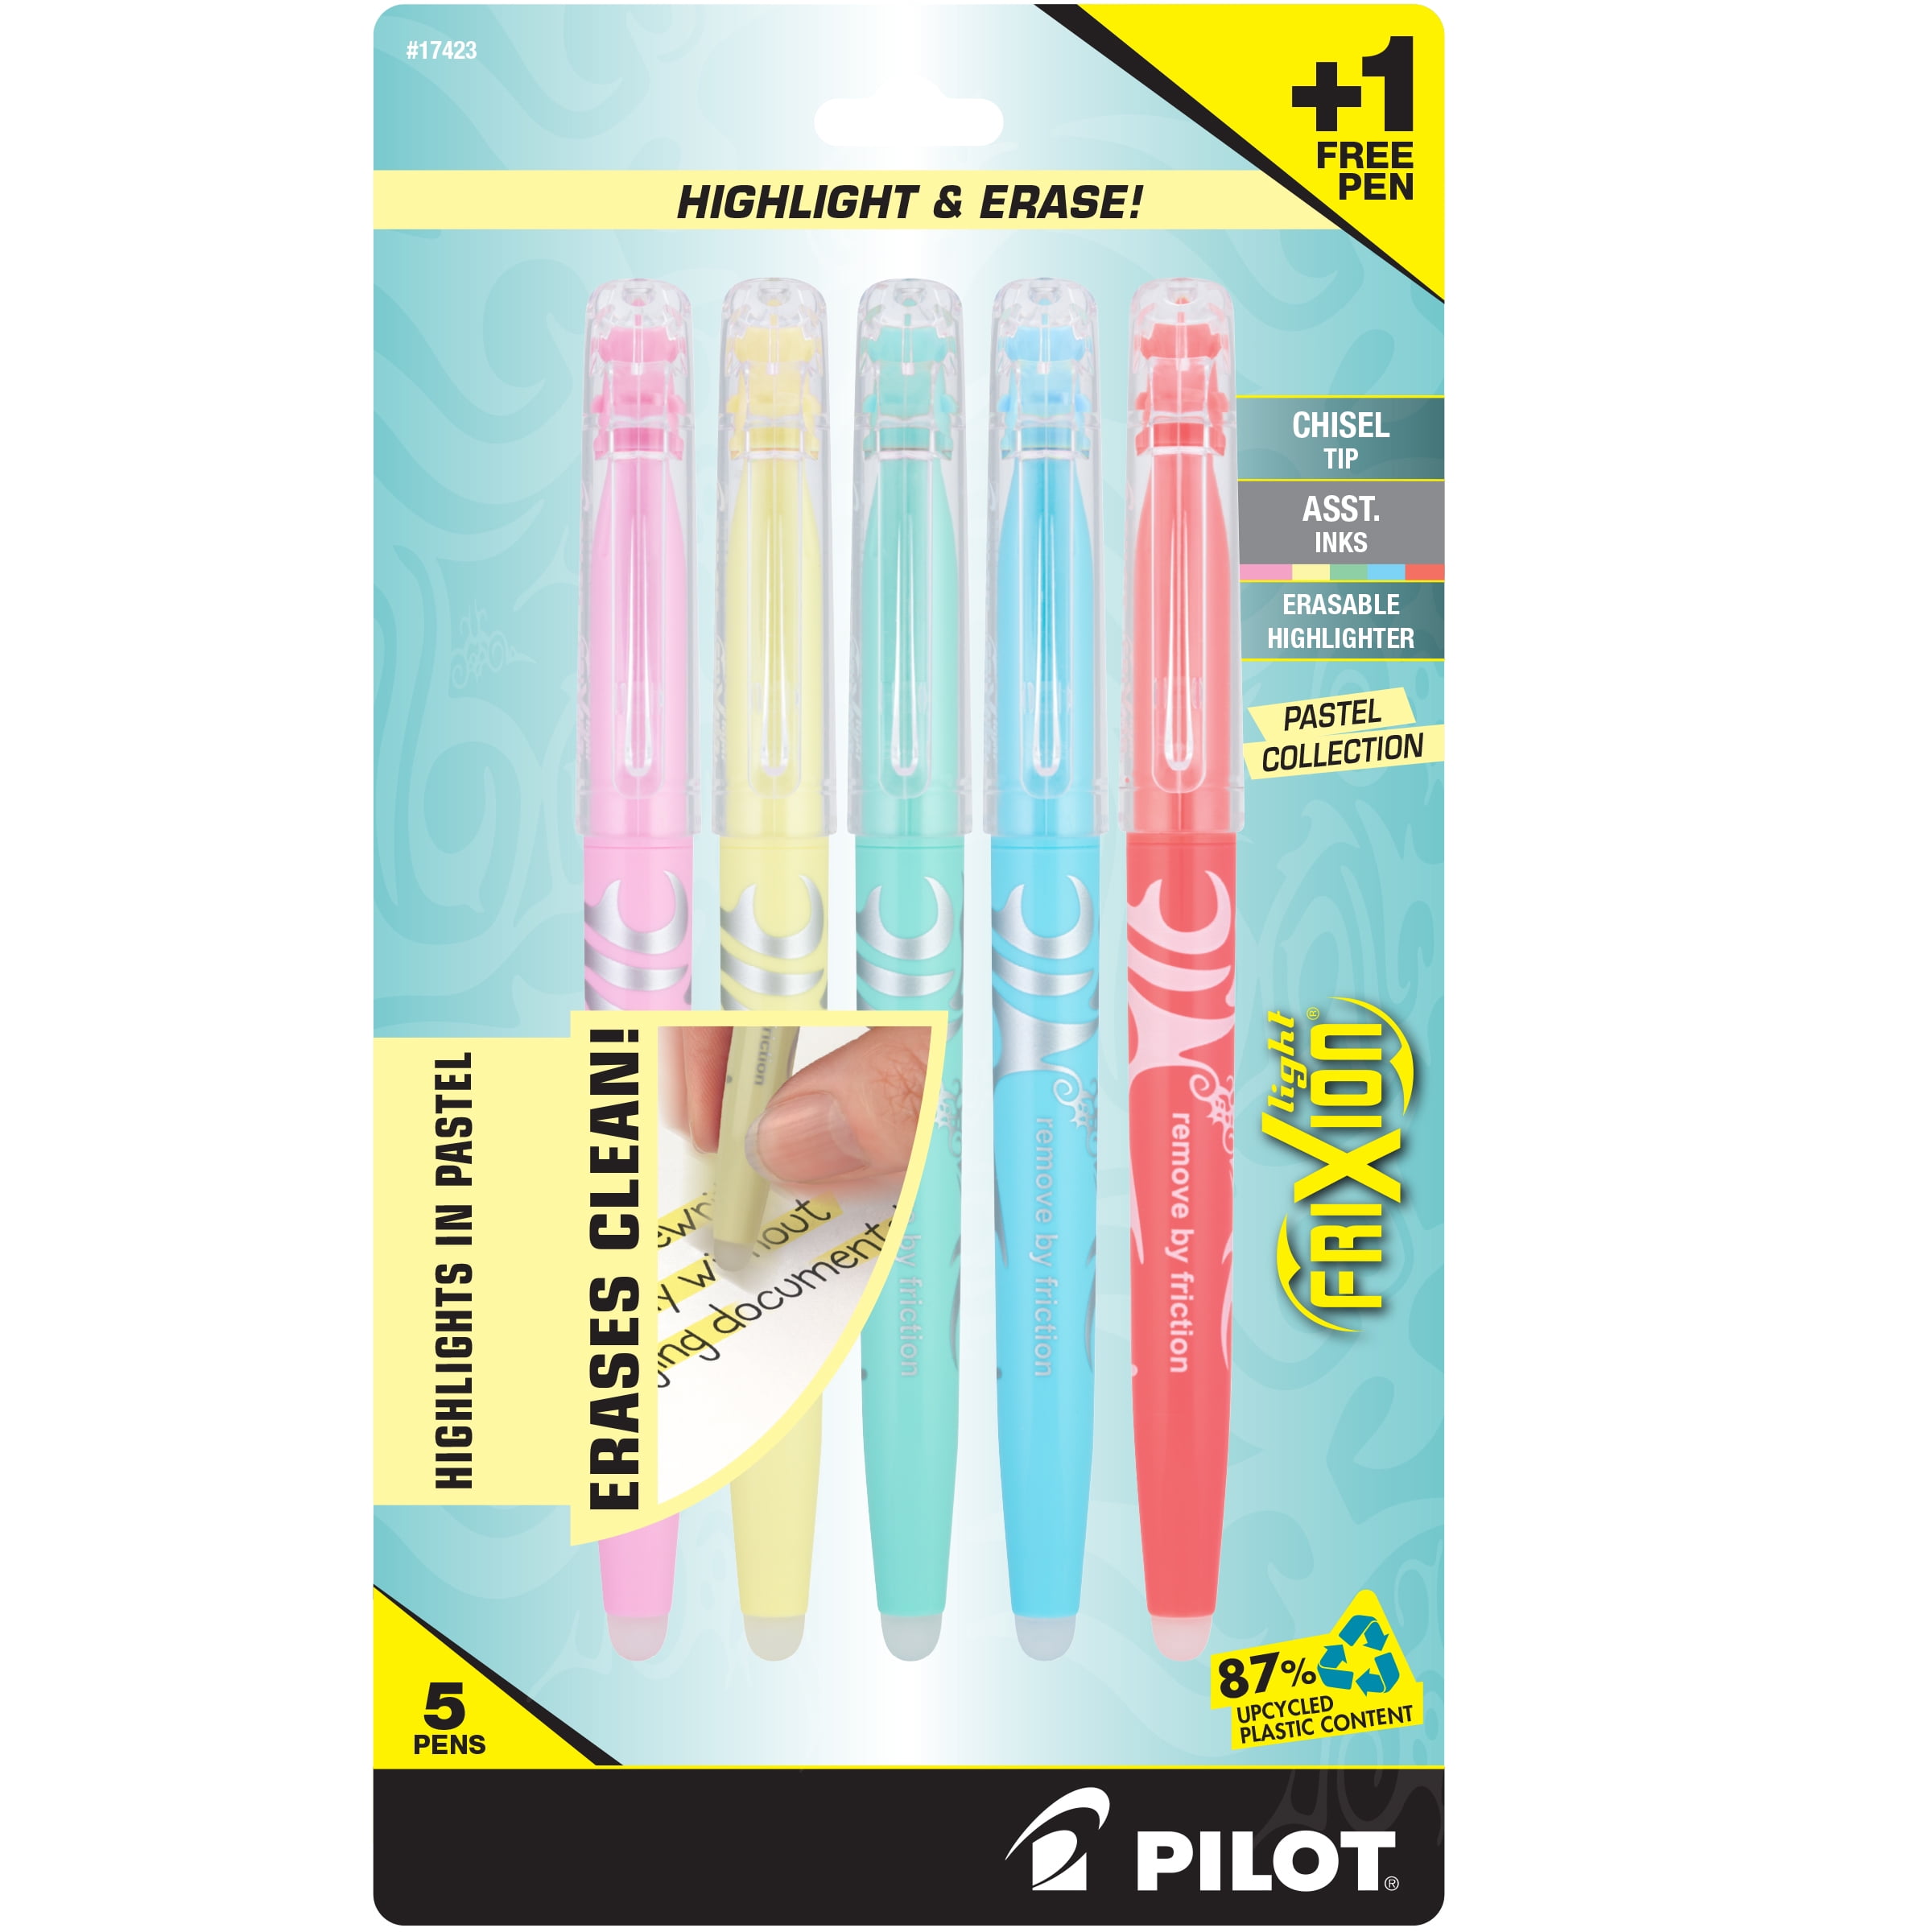 Zebra Fluorescent Pen OPTEX Care 10 Colors Wkcr1-10c From Japan 6dh for sale online 